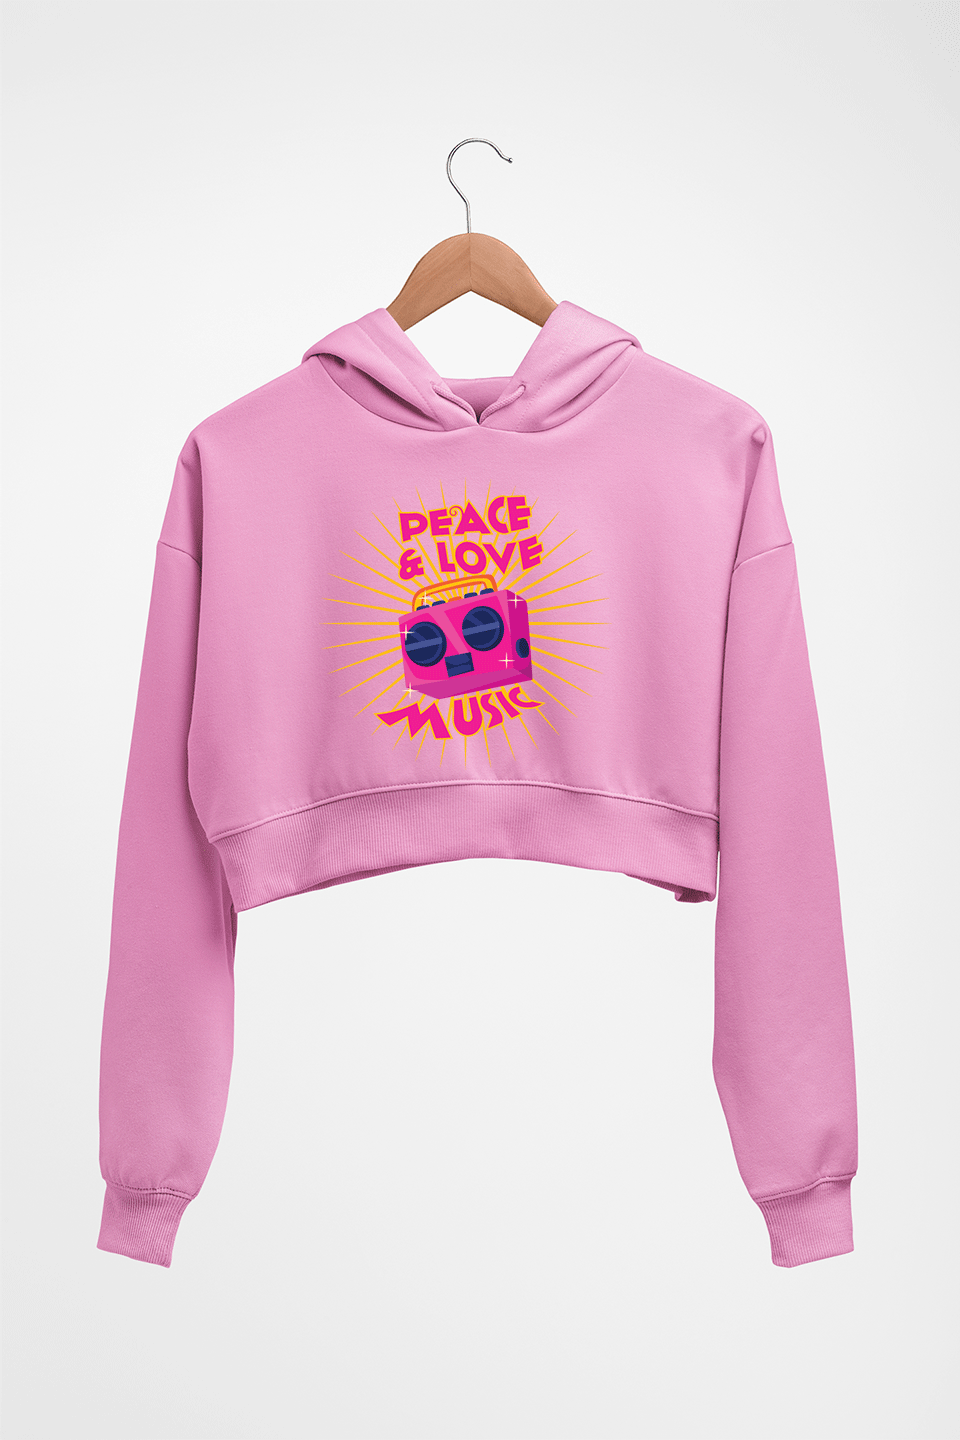 Psychedelic Music Peace Love Crop HOODIE FOR WOMEN